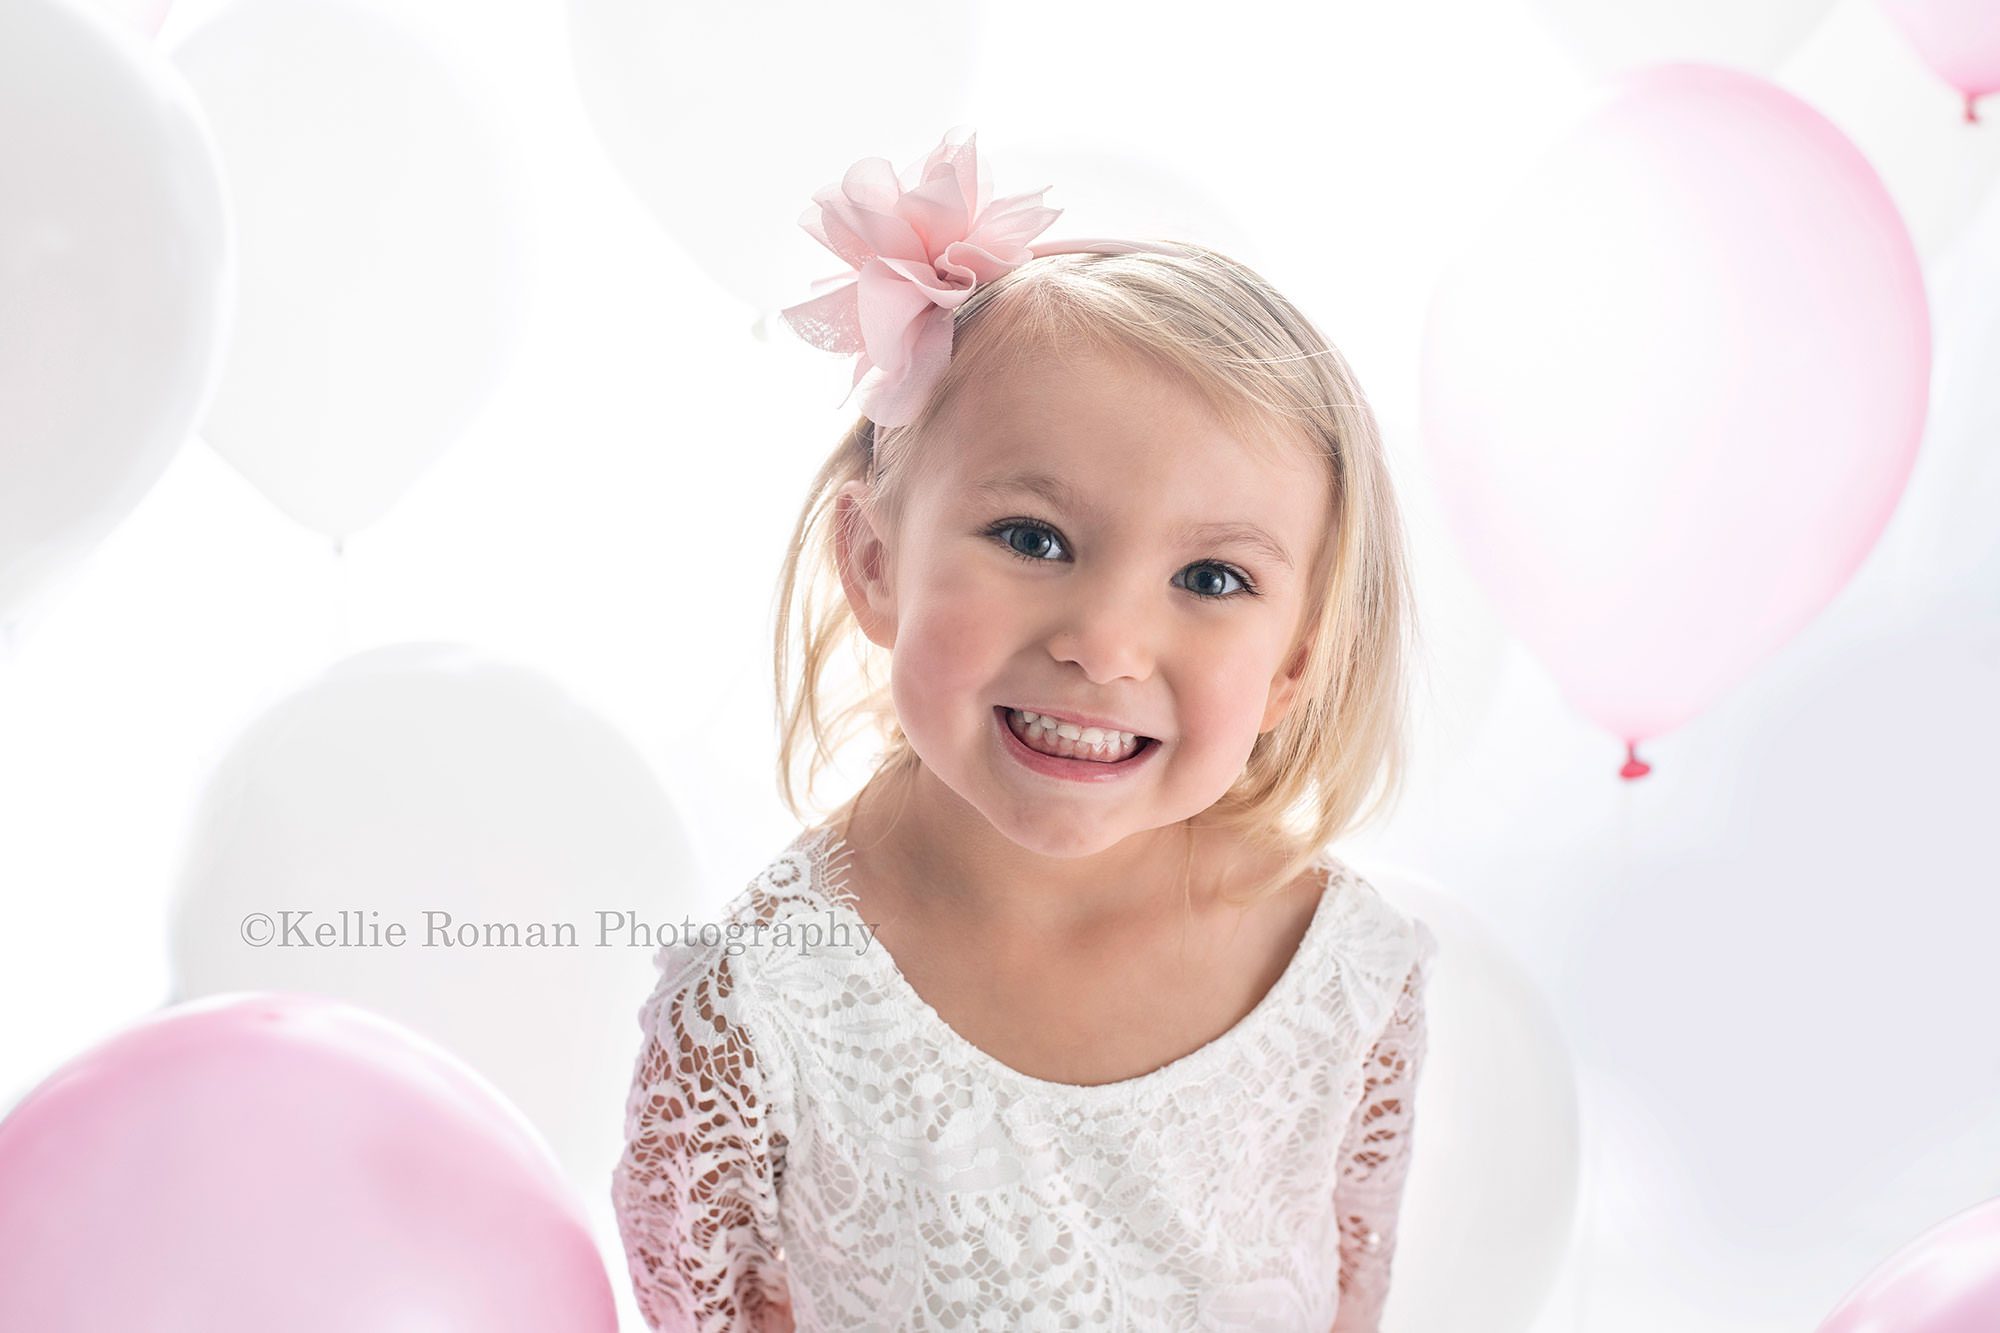 beach colors a three year old girl with blonde hair is in milwaukee photo studio she's wearing a white lace and pink tule dress surrounded by pink and white balloons she's smiling into the camera